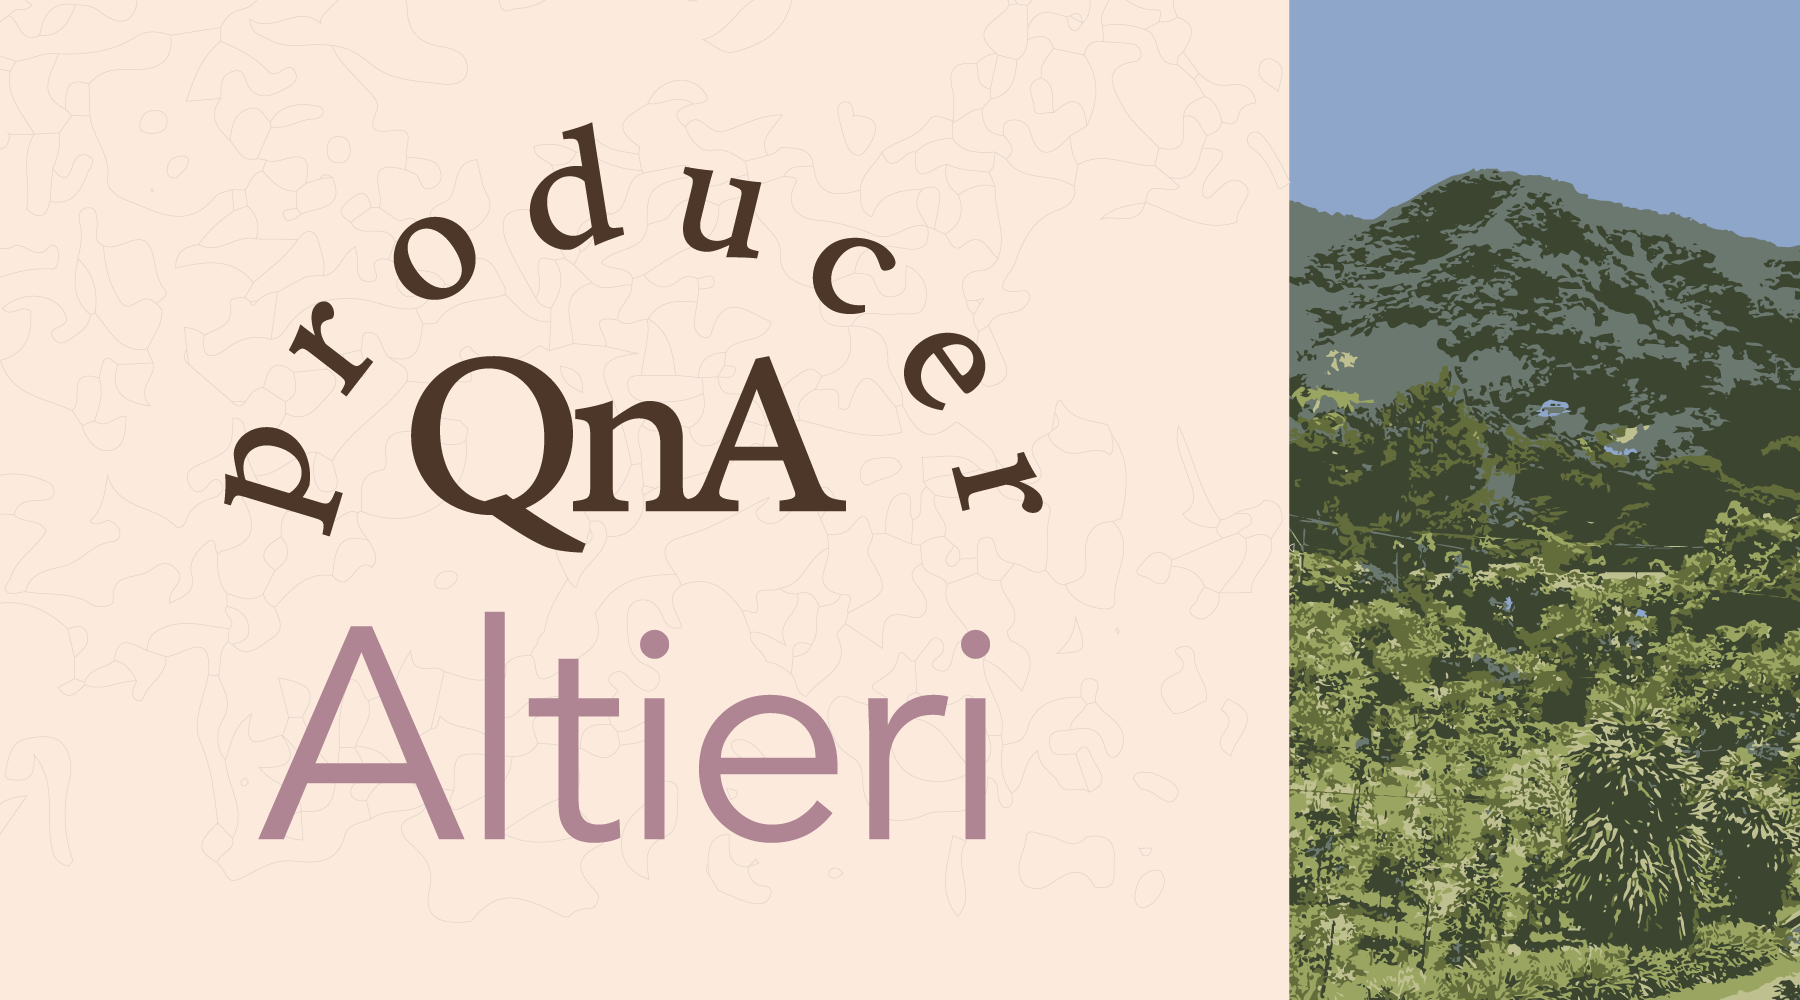 Get to Know the Altieri Farm, Our Direct Supplier of Panama Coffee